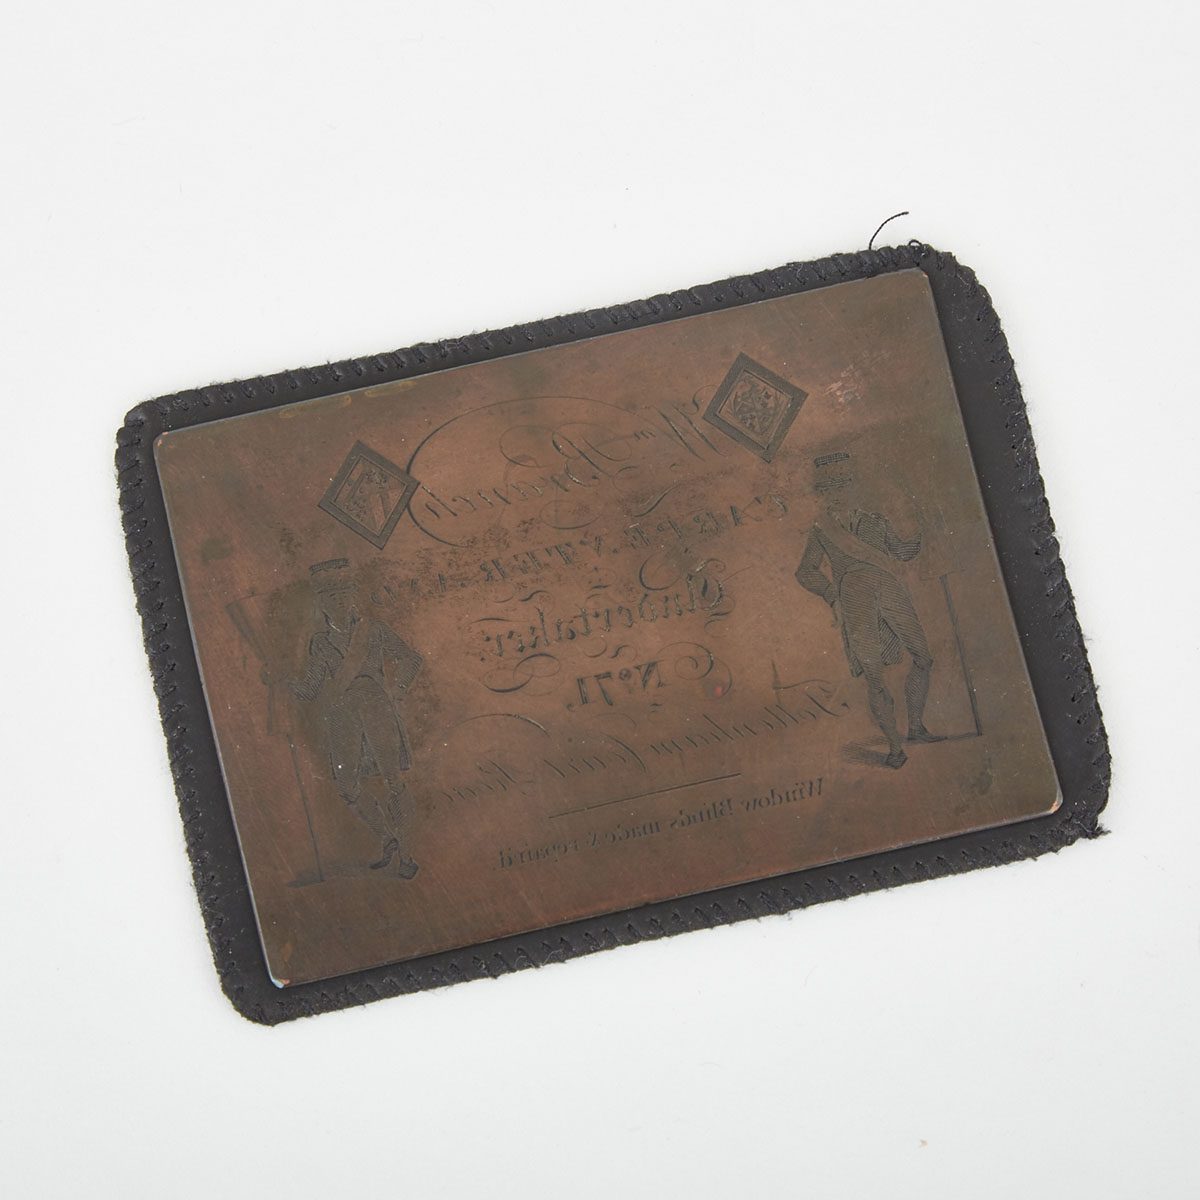 Engraved Copper Printing Plate for ‘Wm. Branch - Carpenter and Undertaker’, London, c.1820